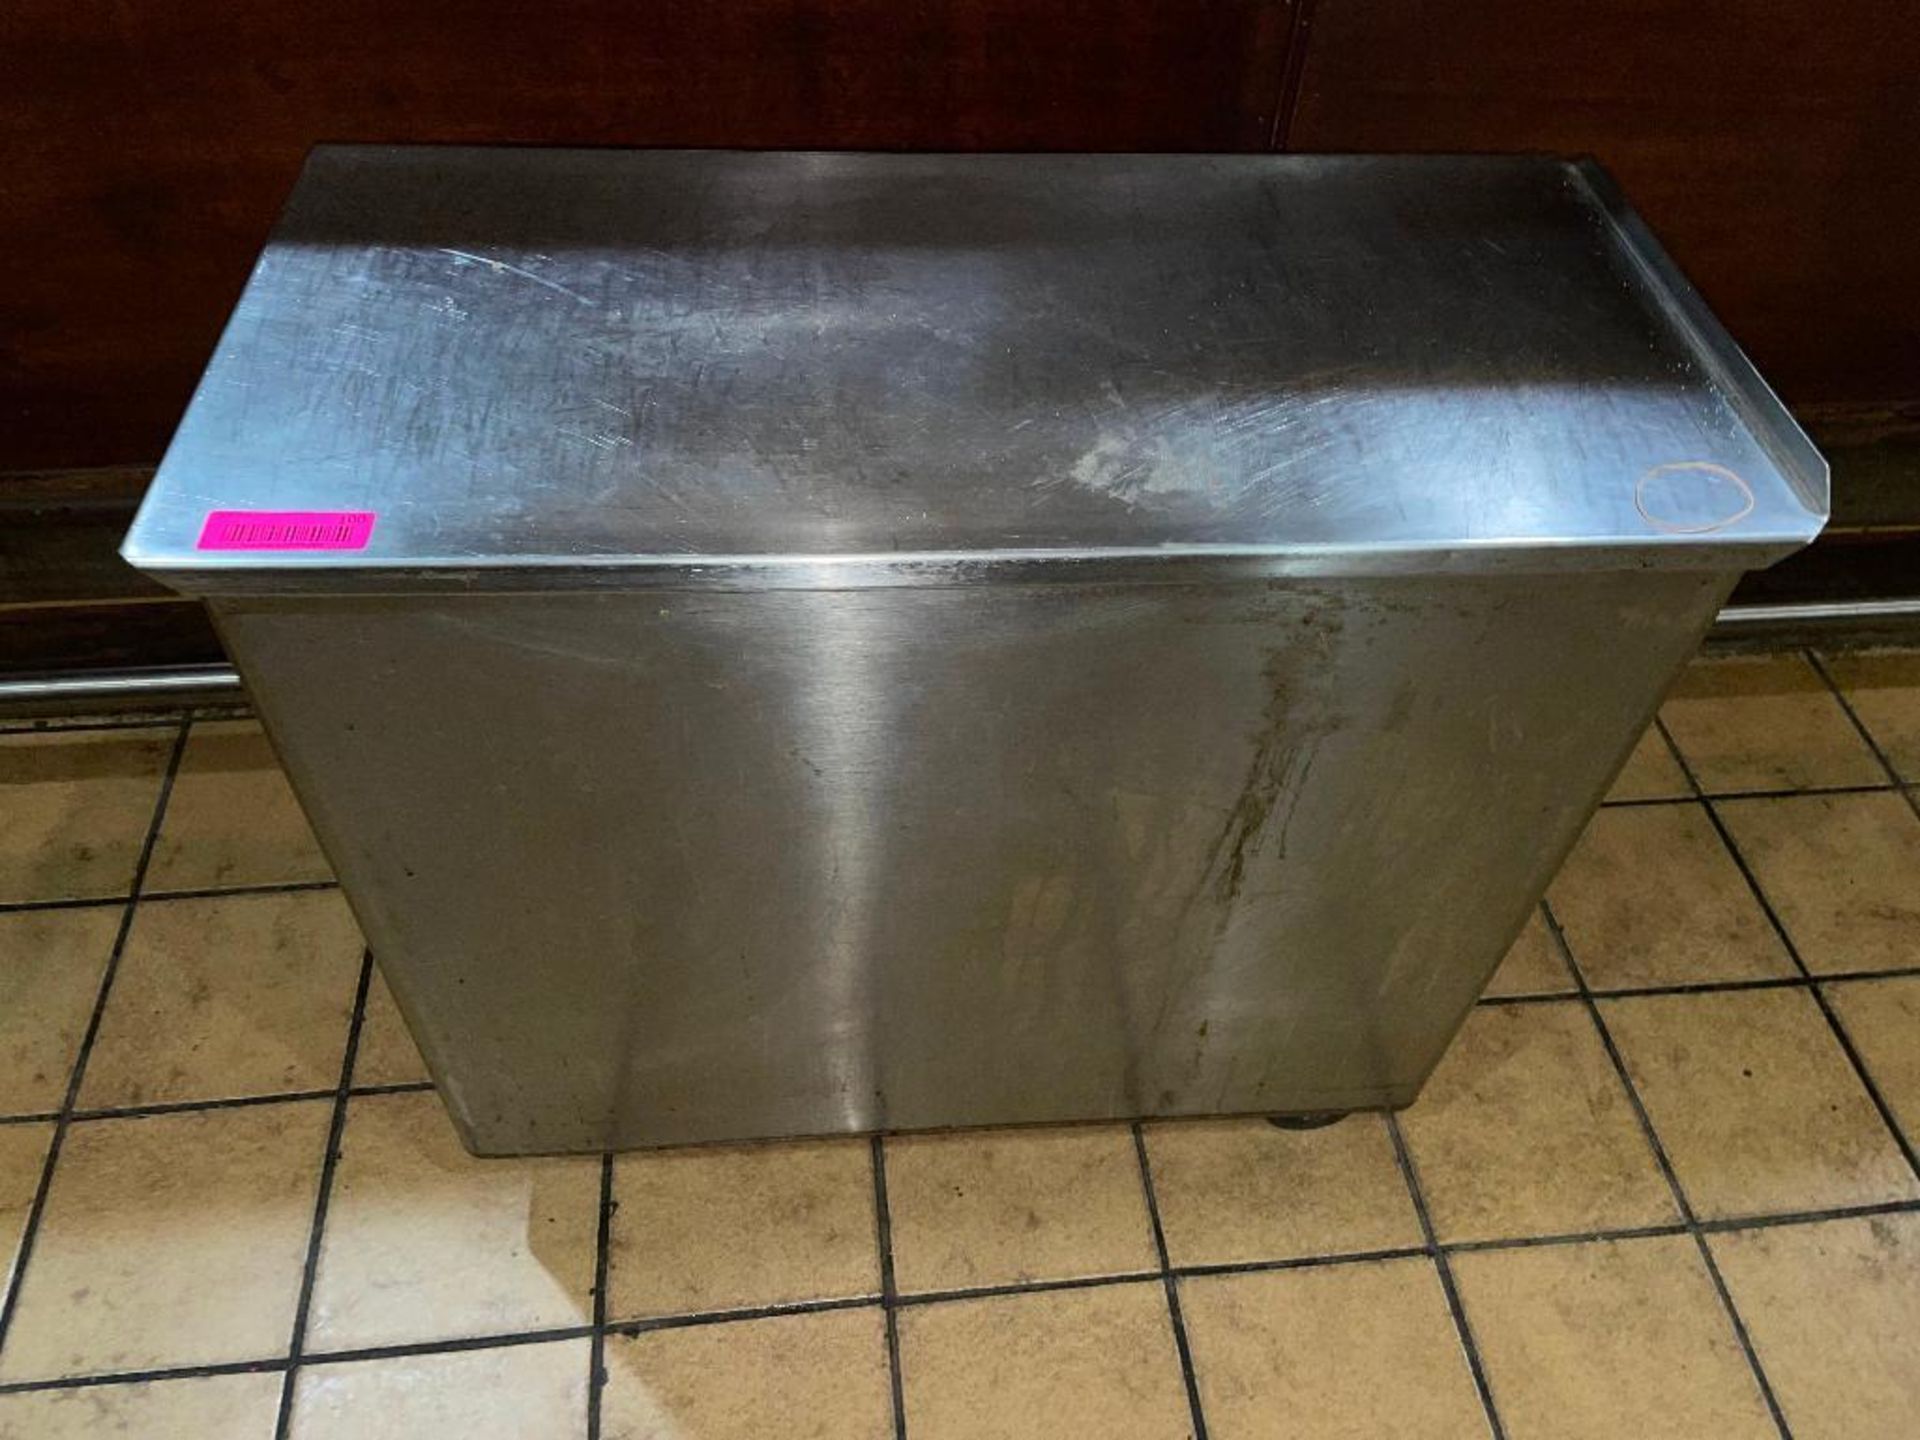 DESCRIPTION: 15 GALLON STAINLESS INGREDIENTS BIN LOCATION: SEATING QTY: 1